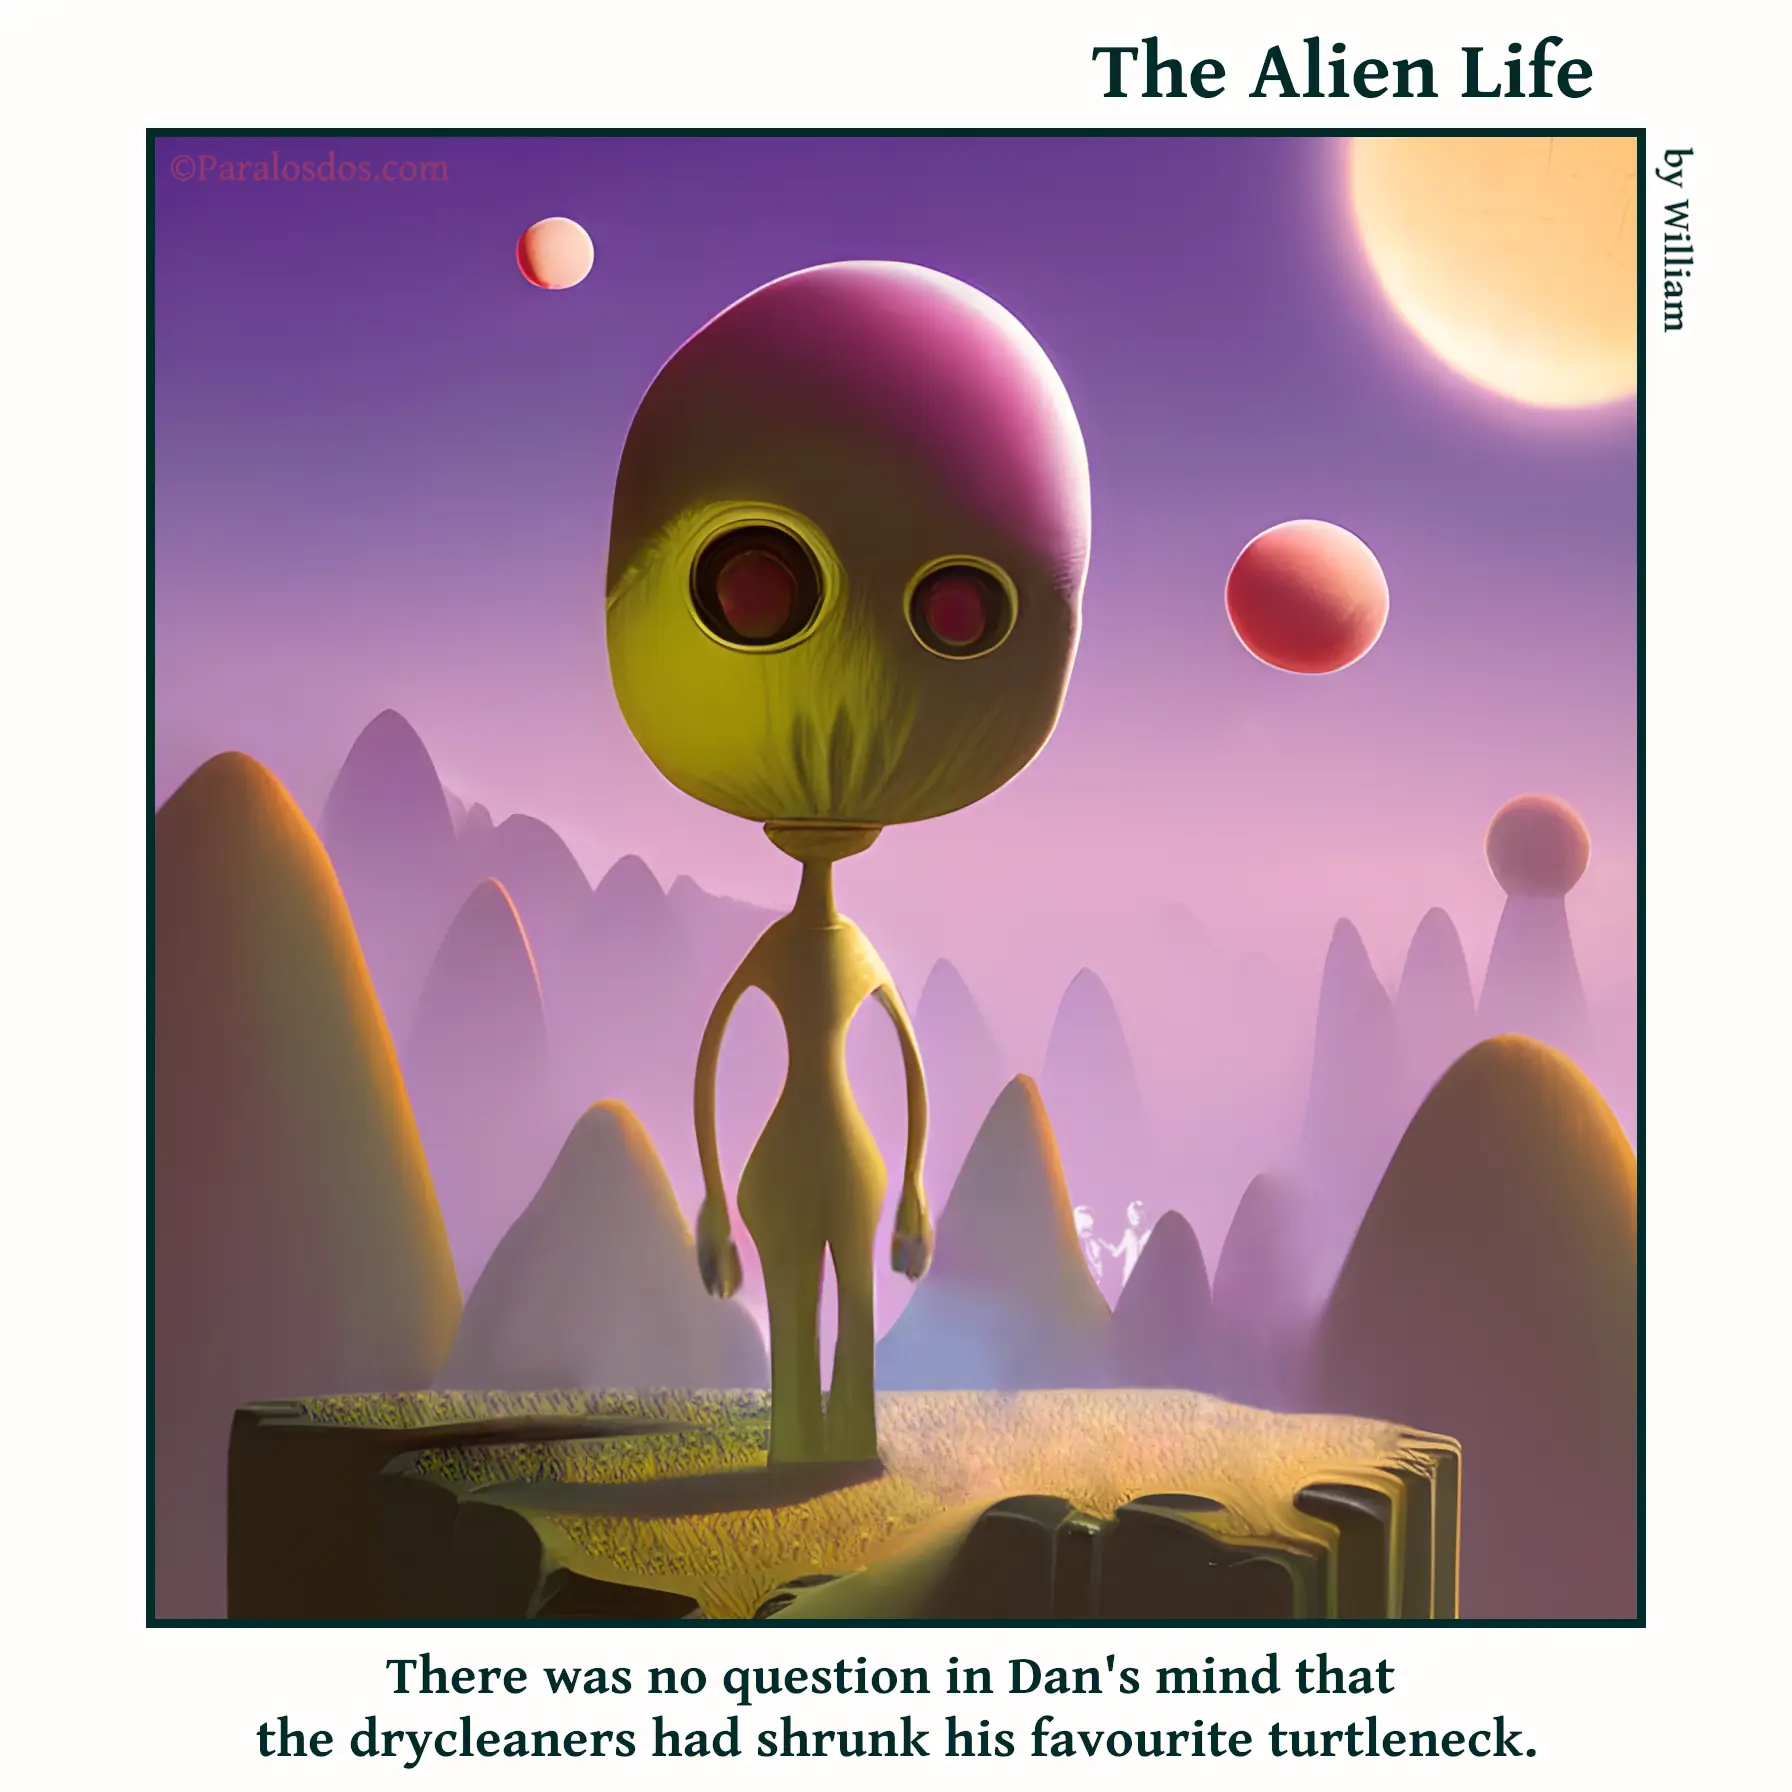 The Alien Life, one panel Comic. An alien has a turtleneck on that is squeezing his head at the neck so that he looks like a balloon. The caption reads: There was no question in Dan's mind that the dry cleaners had shrunk his favourite turtleneck.